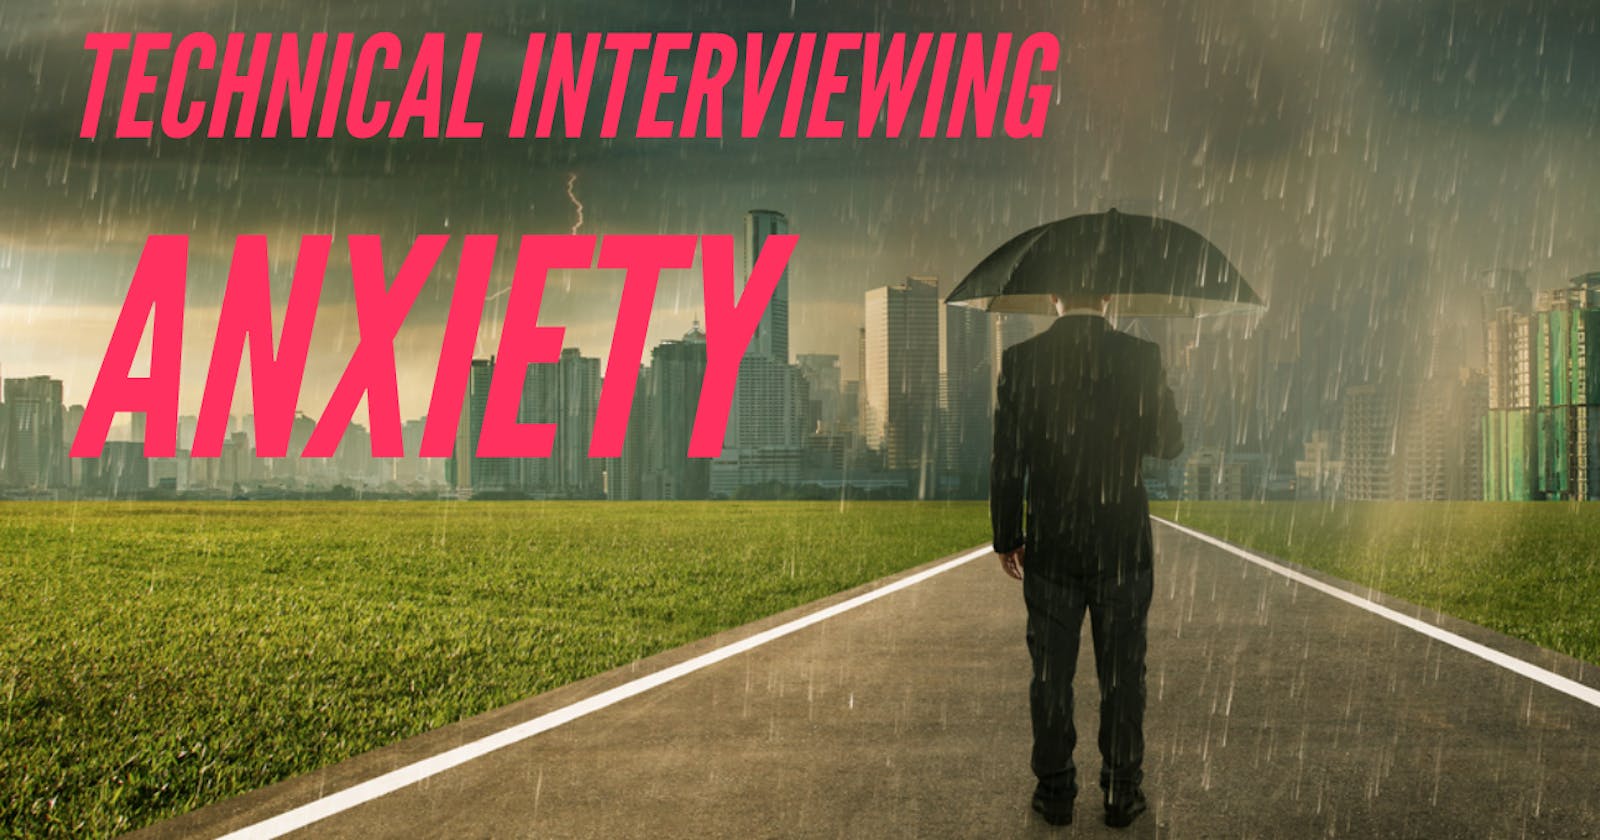 Don't let anxiety ruin your technical interview!